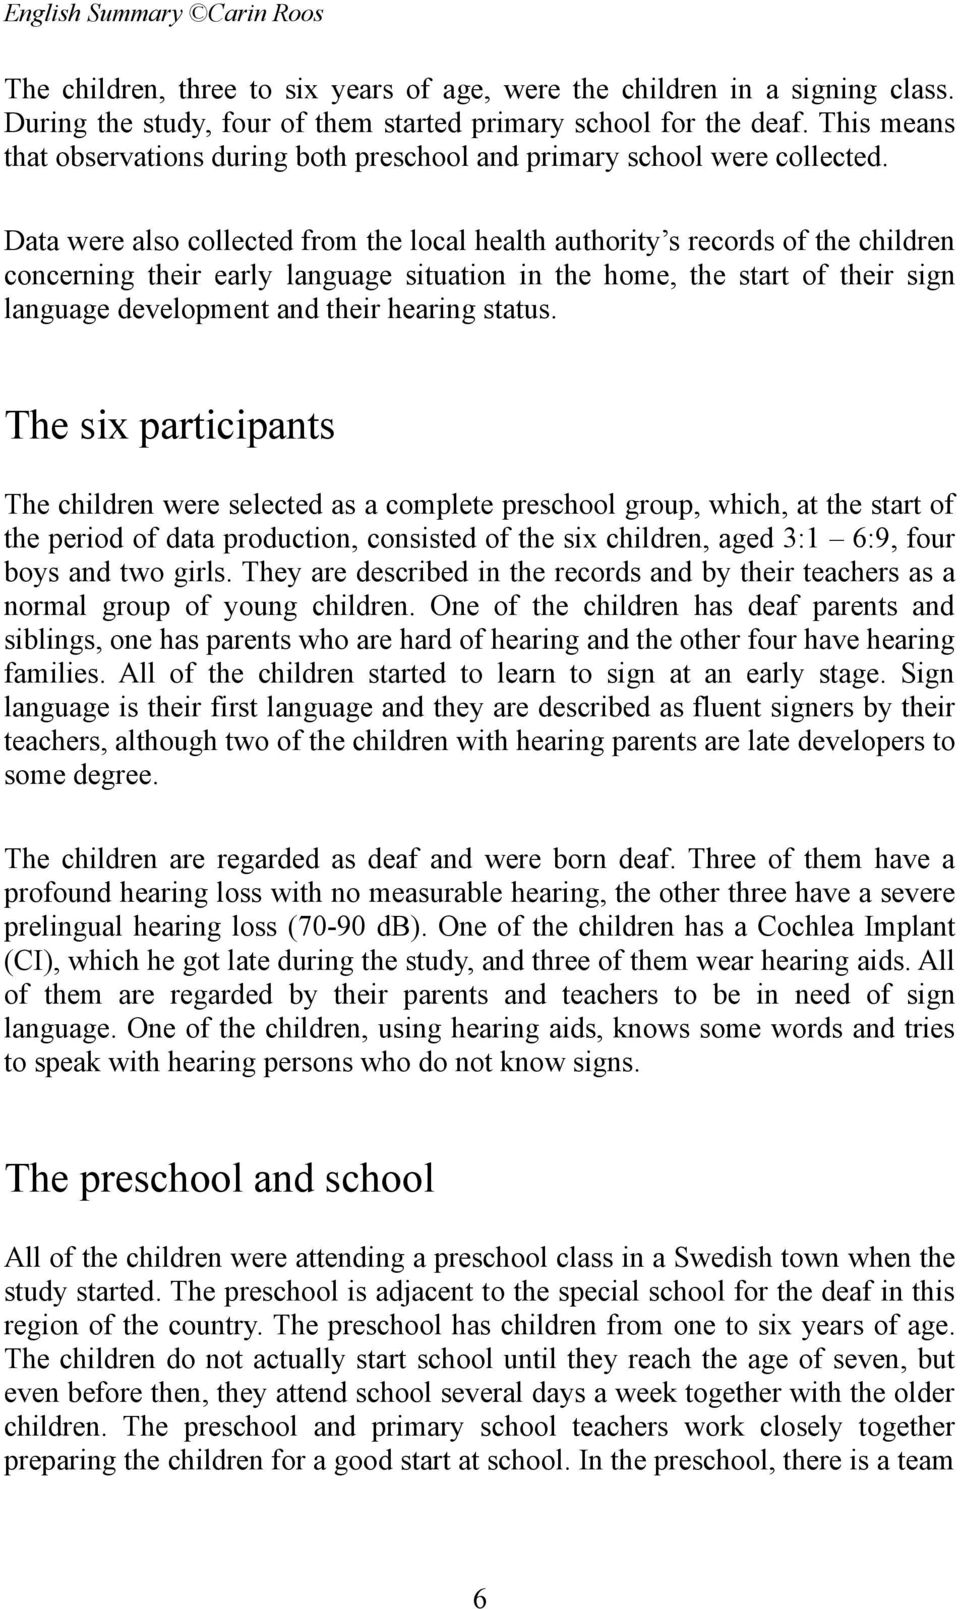 Data were also collected from the local health authority s records of the children concerning their early language situation in the home, the start of their sign language development and their